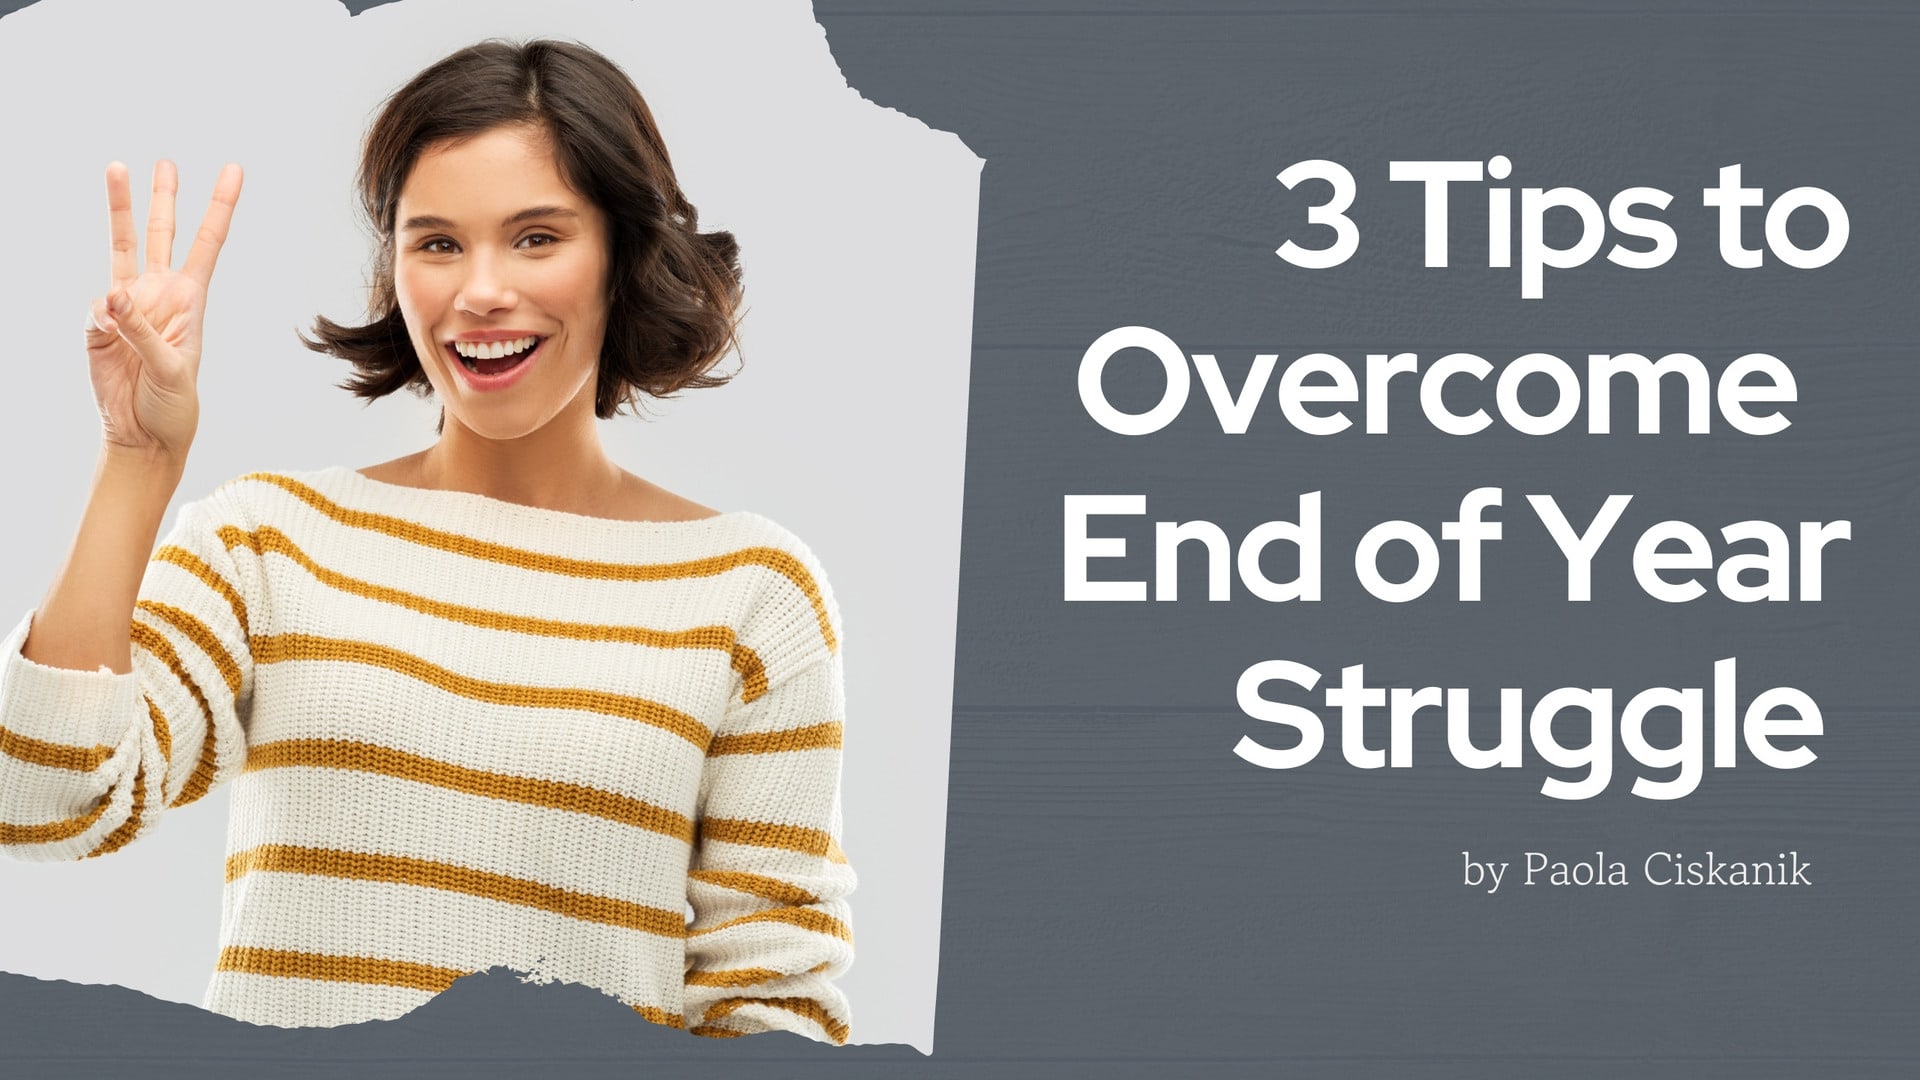 3 Tips to Overcome the End of Year Struggle